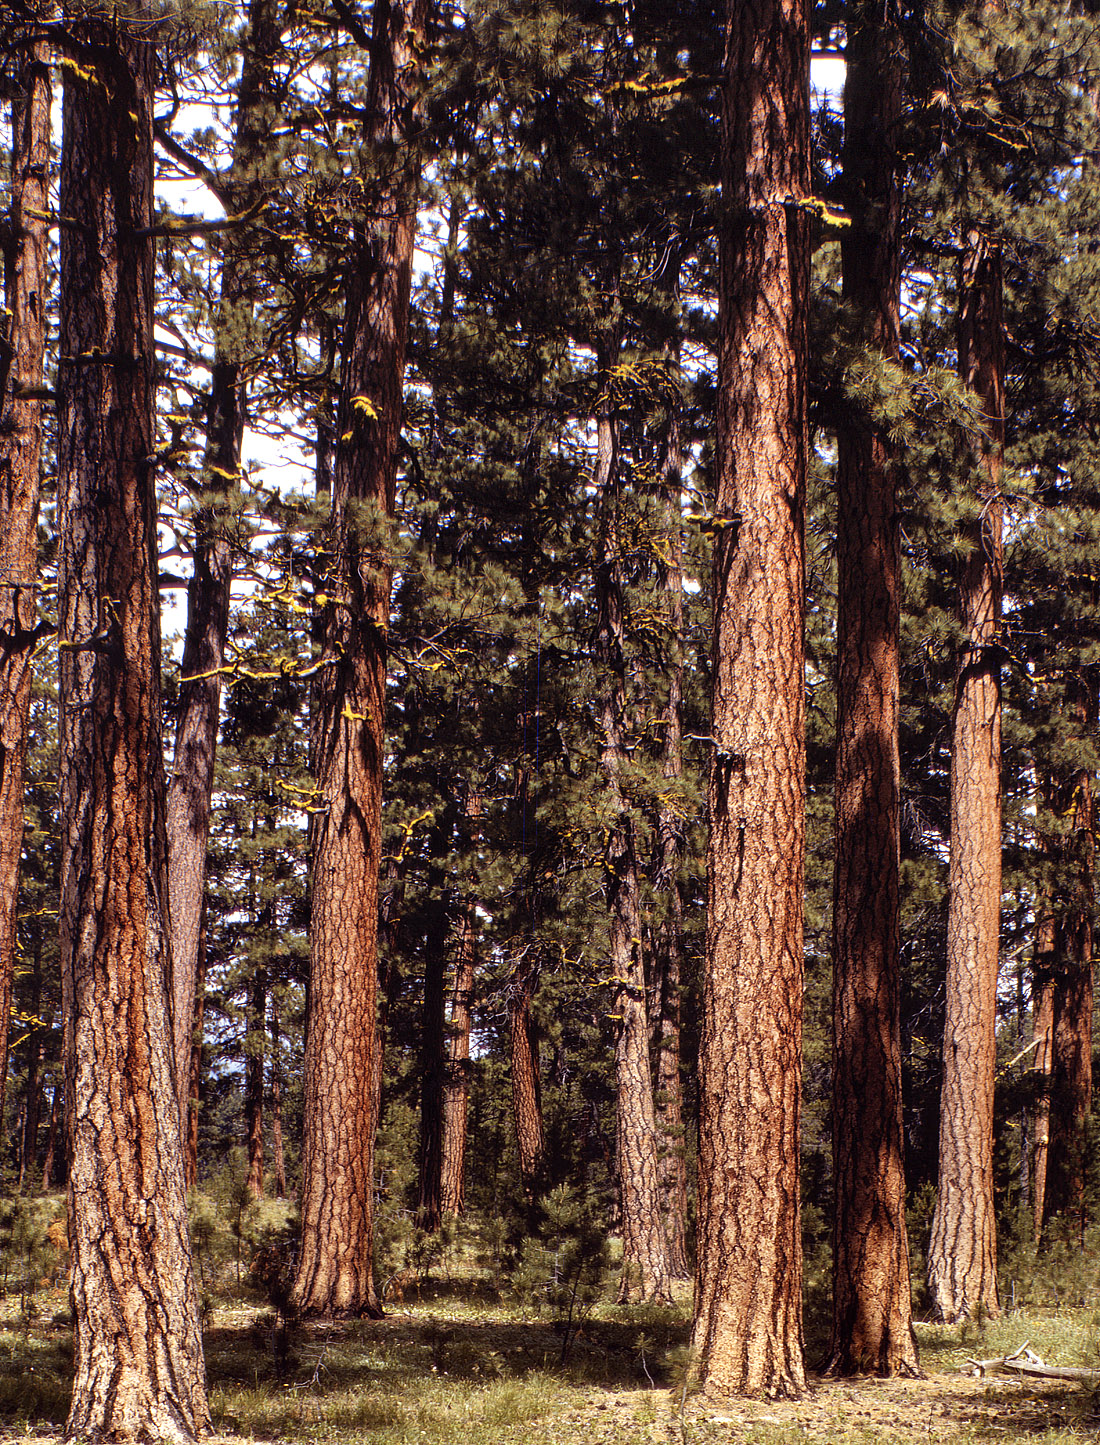 July 1942. "Stand of virgin ponderosa pine, Malheur National Forest, Grant County, Oregon." View full size. 4x5 Kodachrome transparency by Russell Lee.